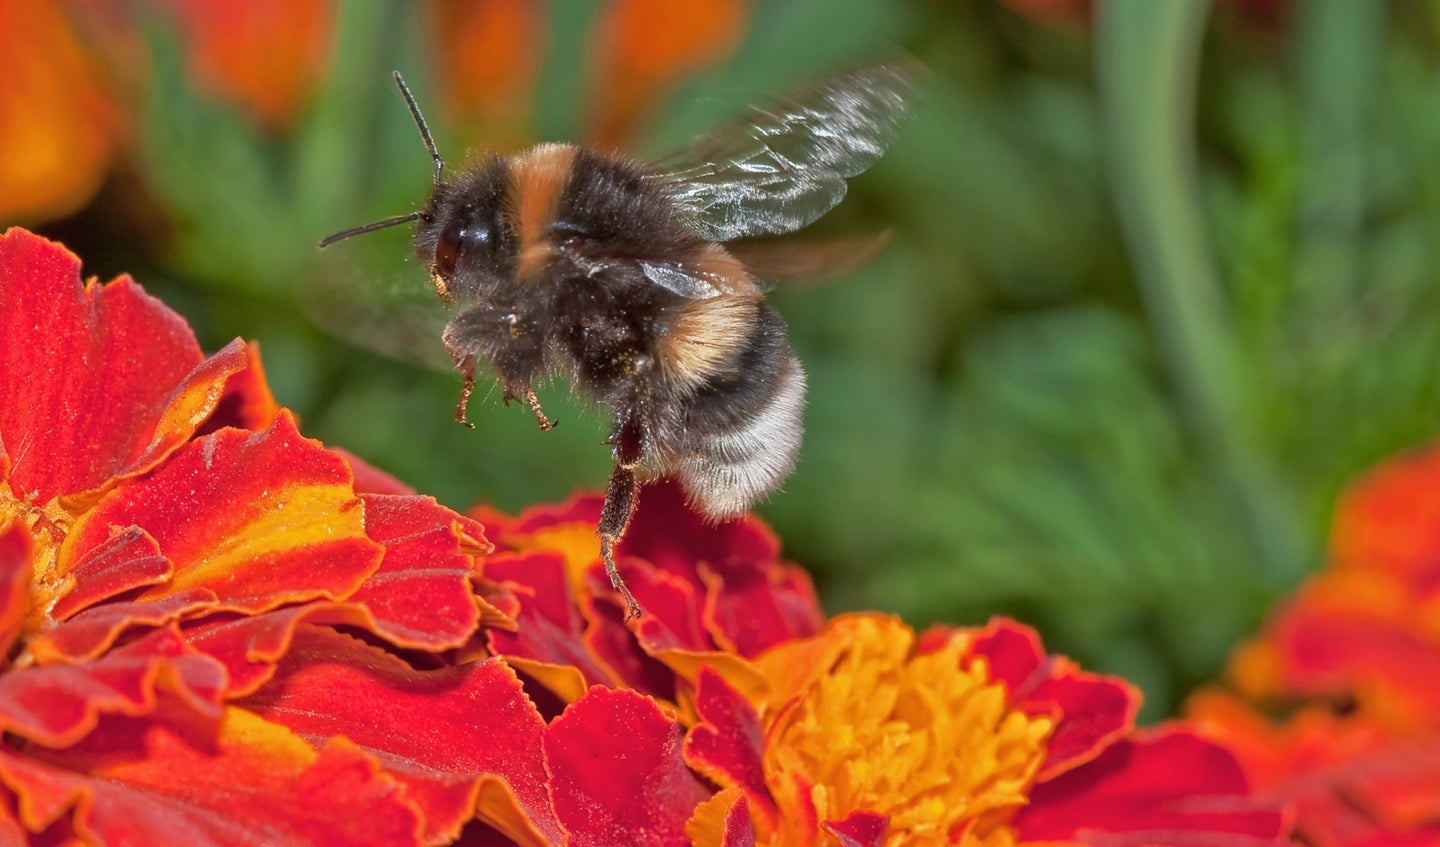 Bumblebee pollinator over red and orange flowers